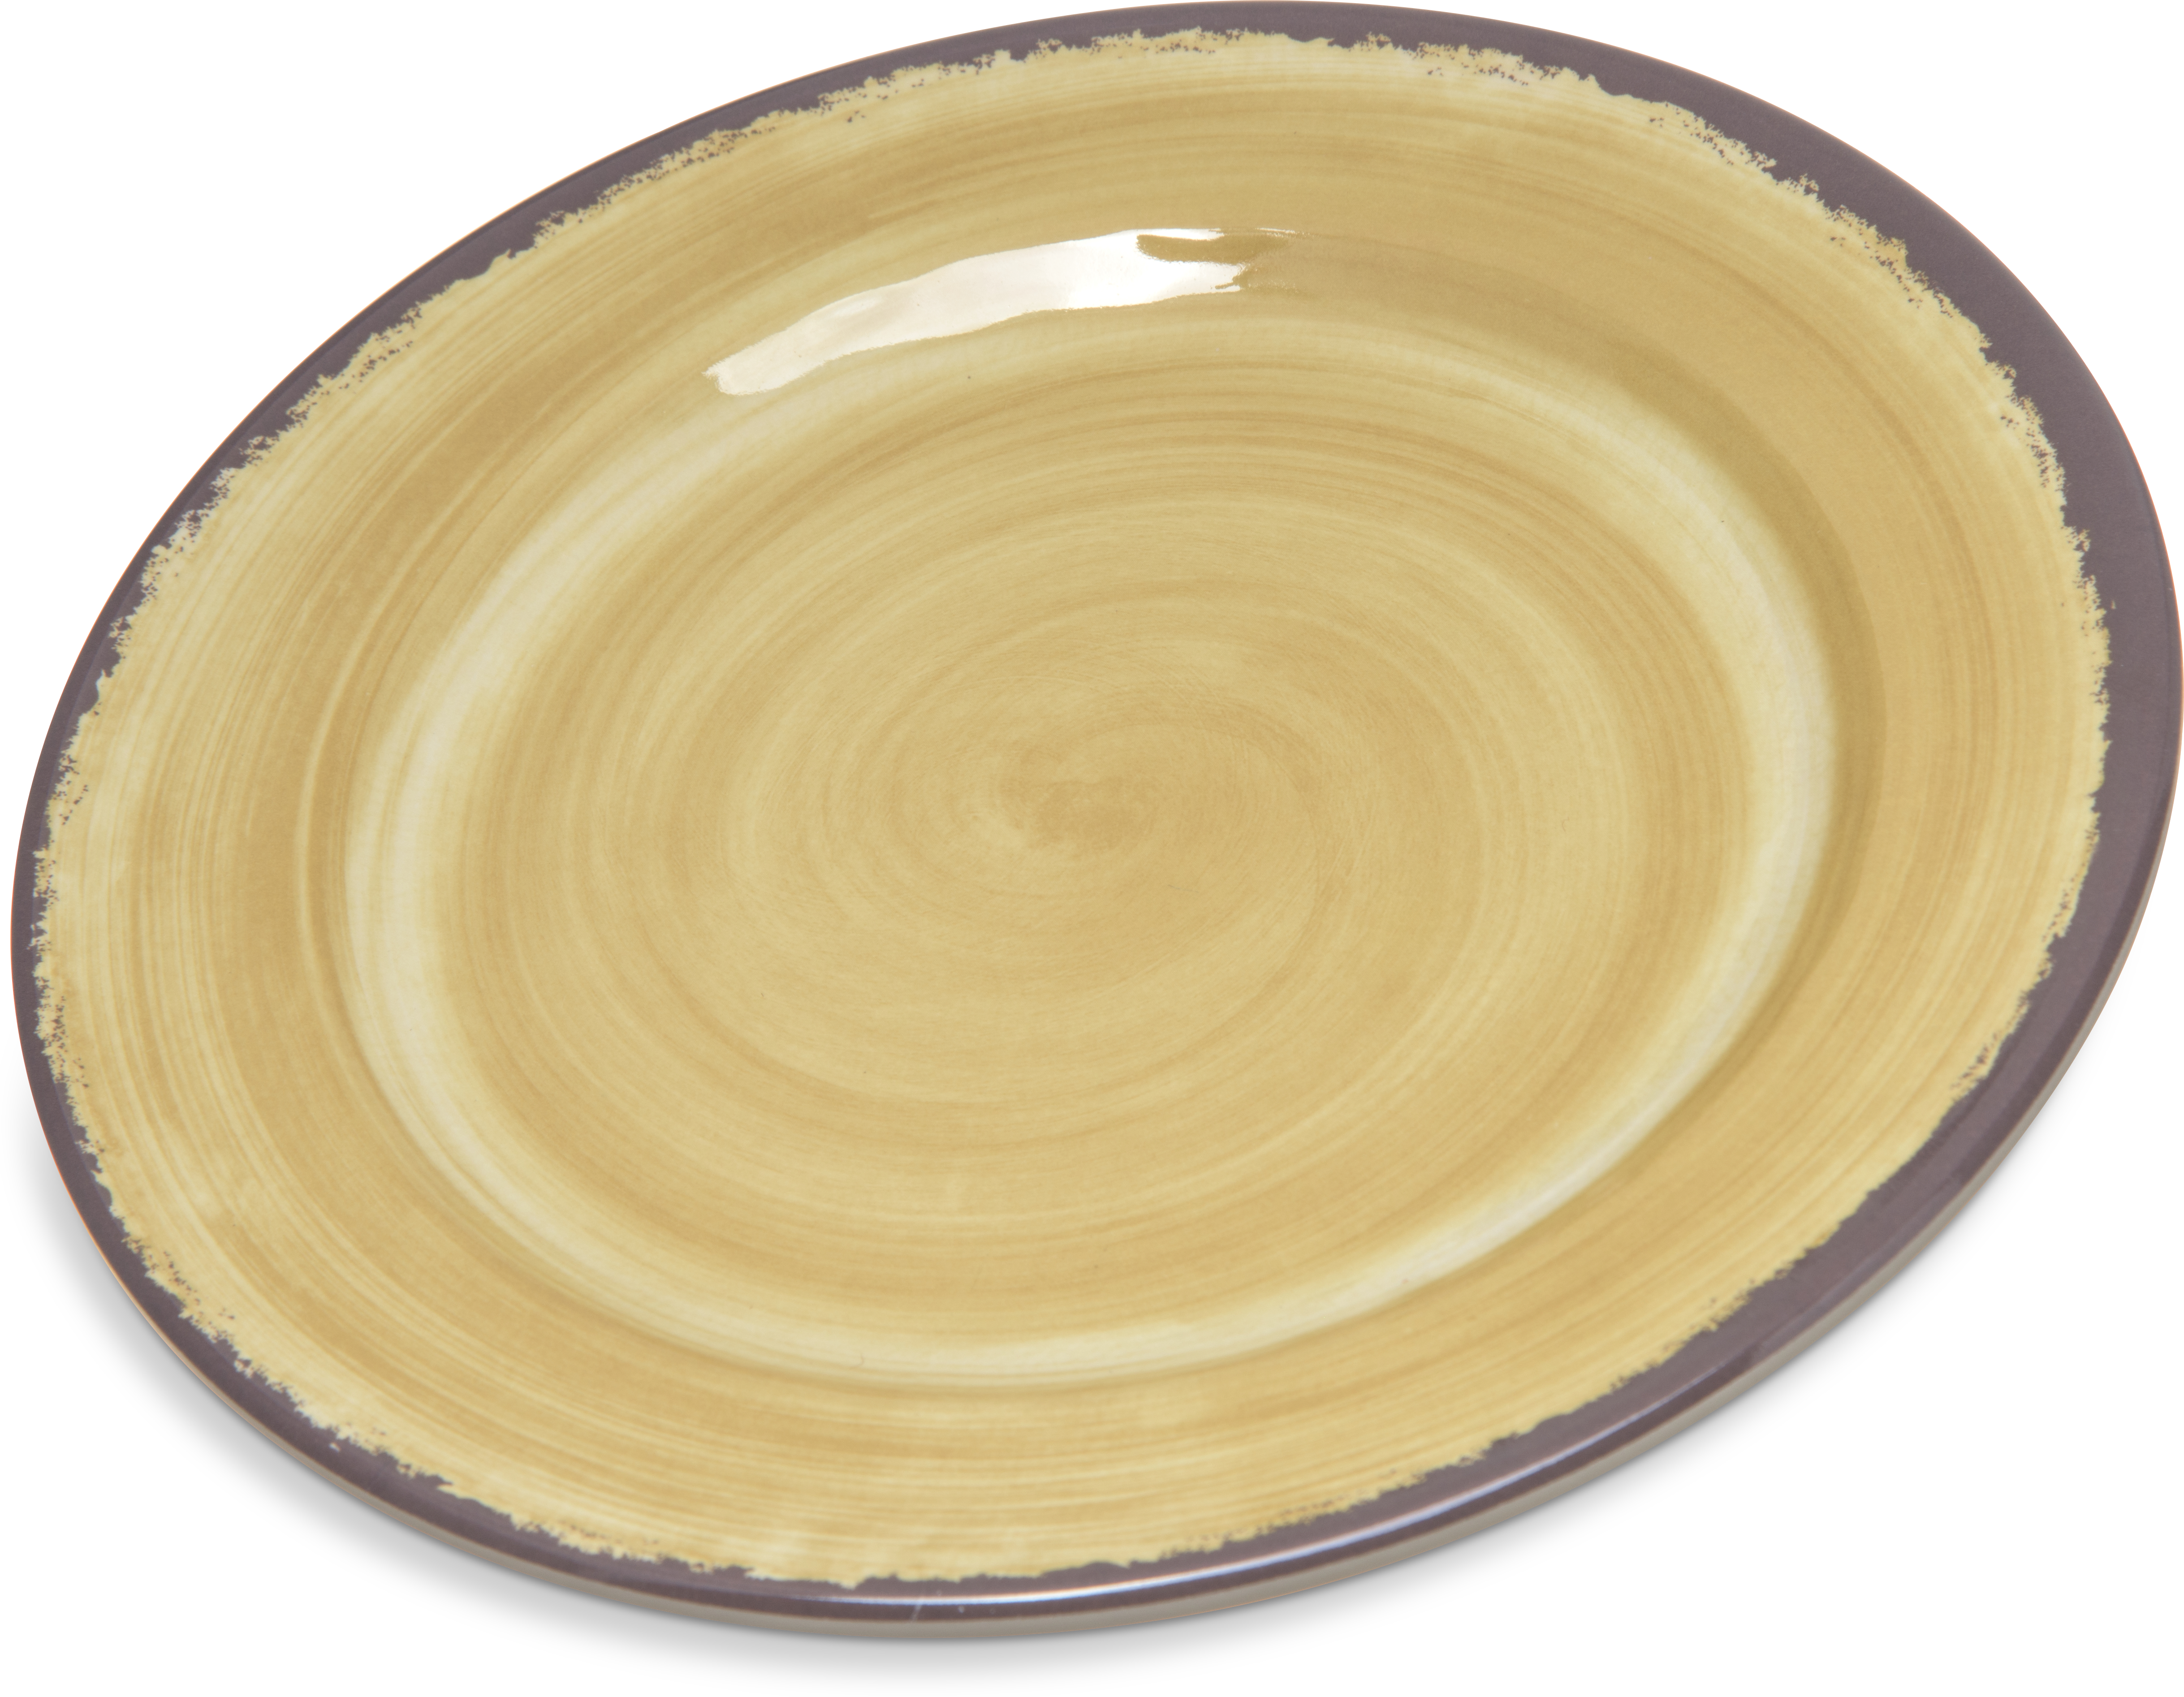 Mingle Melamine Bread And Butter Plate 7 - Amber